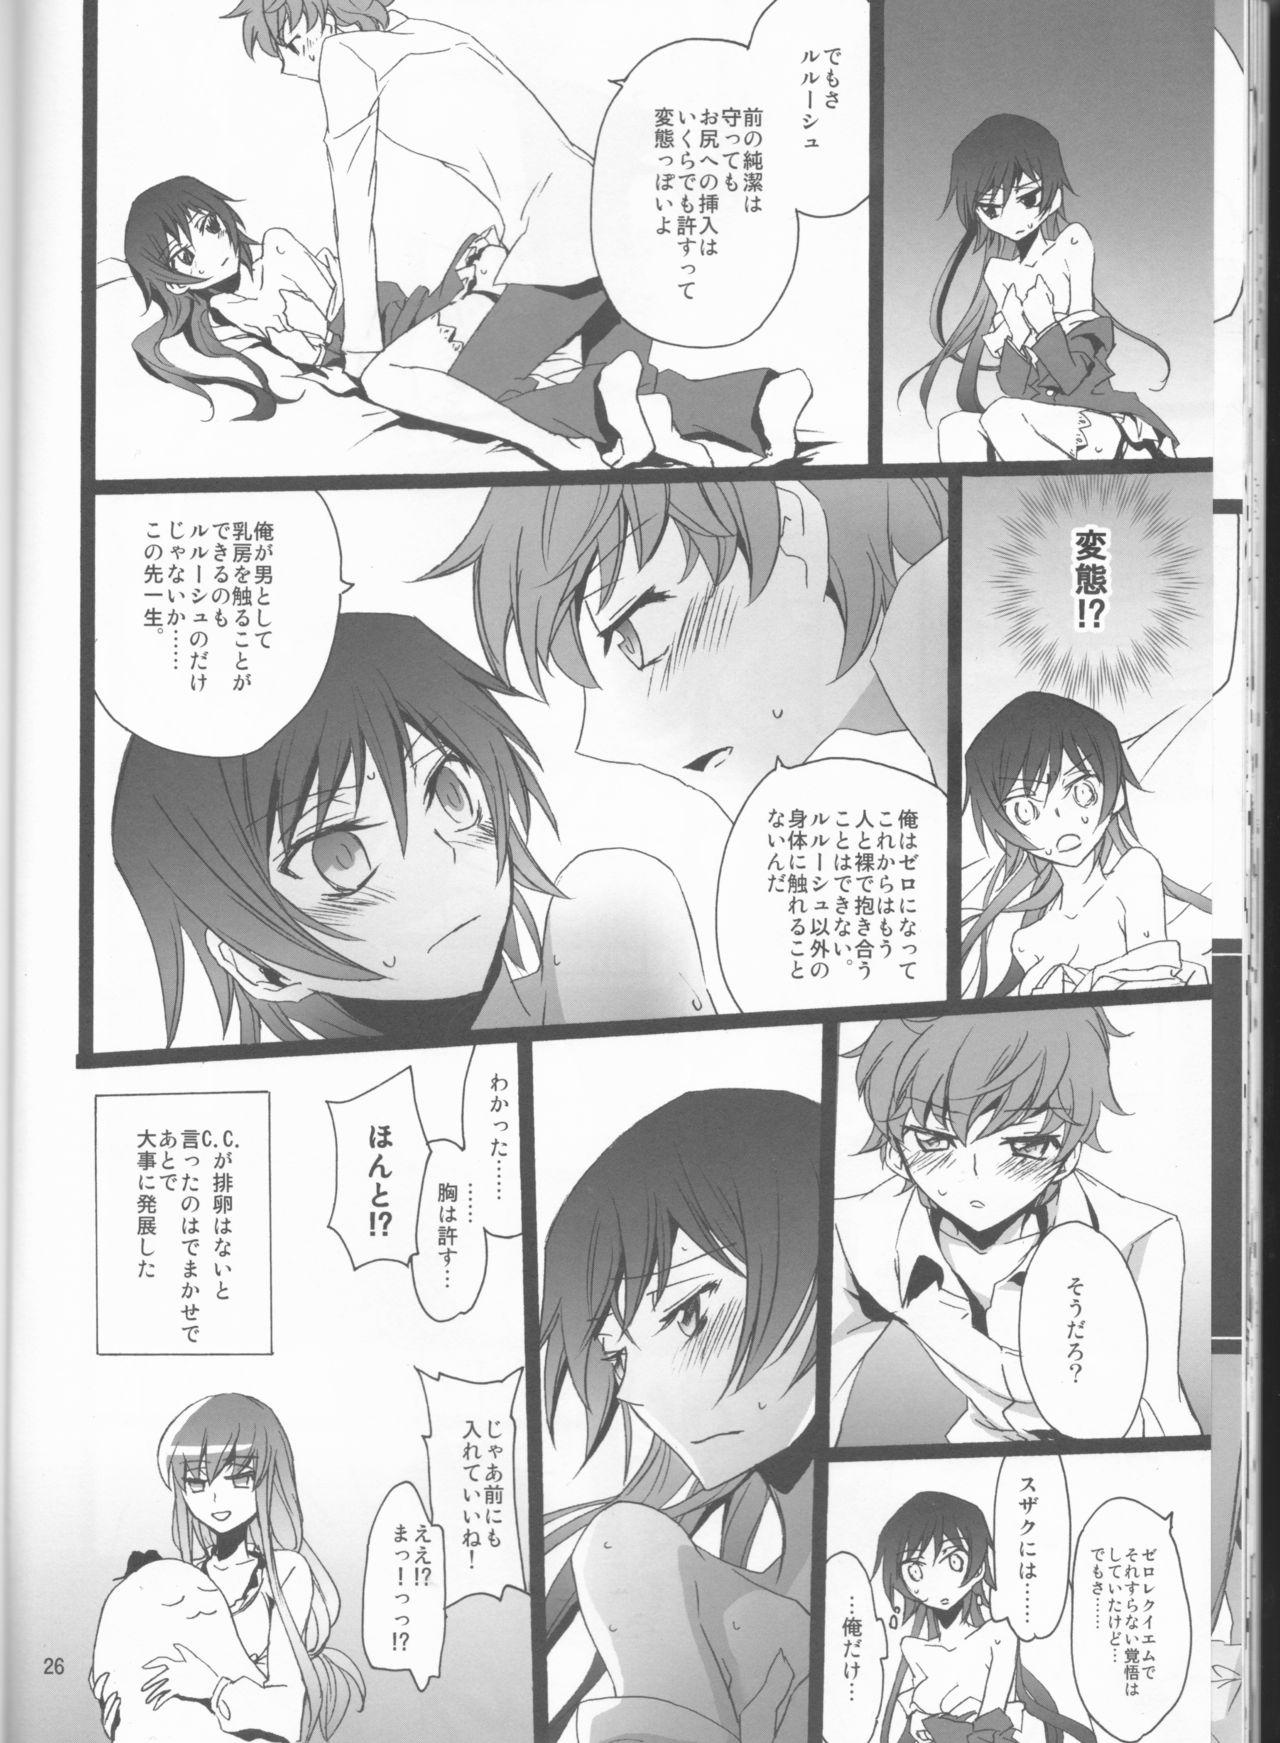 Pale Chameleon Girl - Code geass Gay Shorthair - Page 26